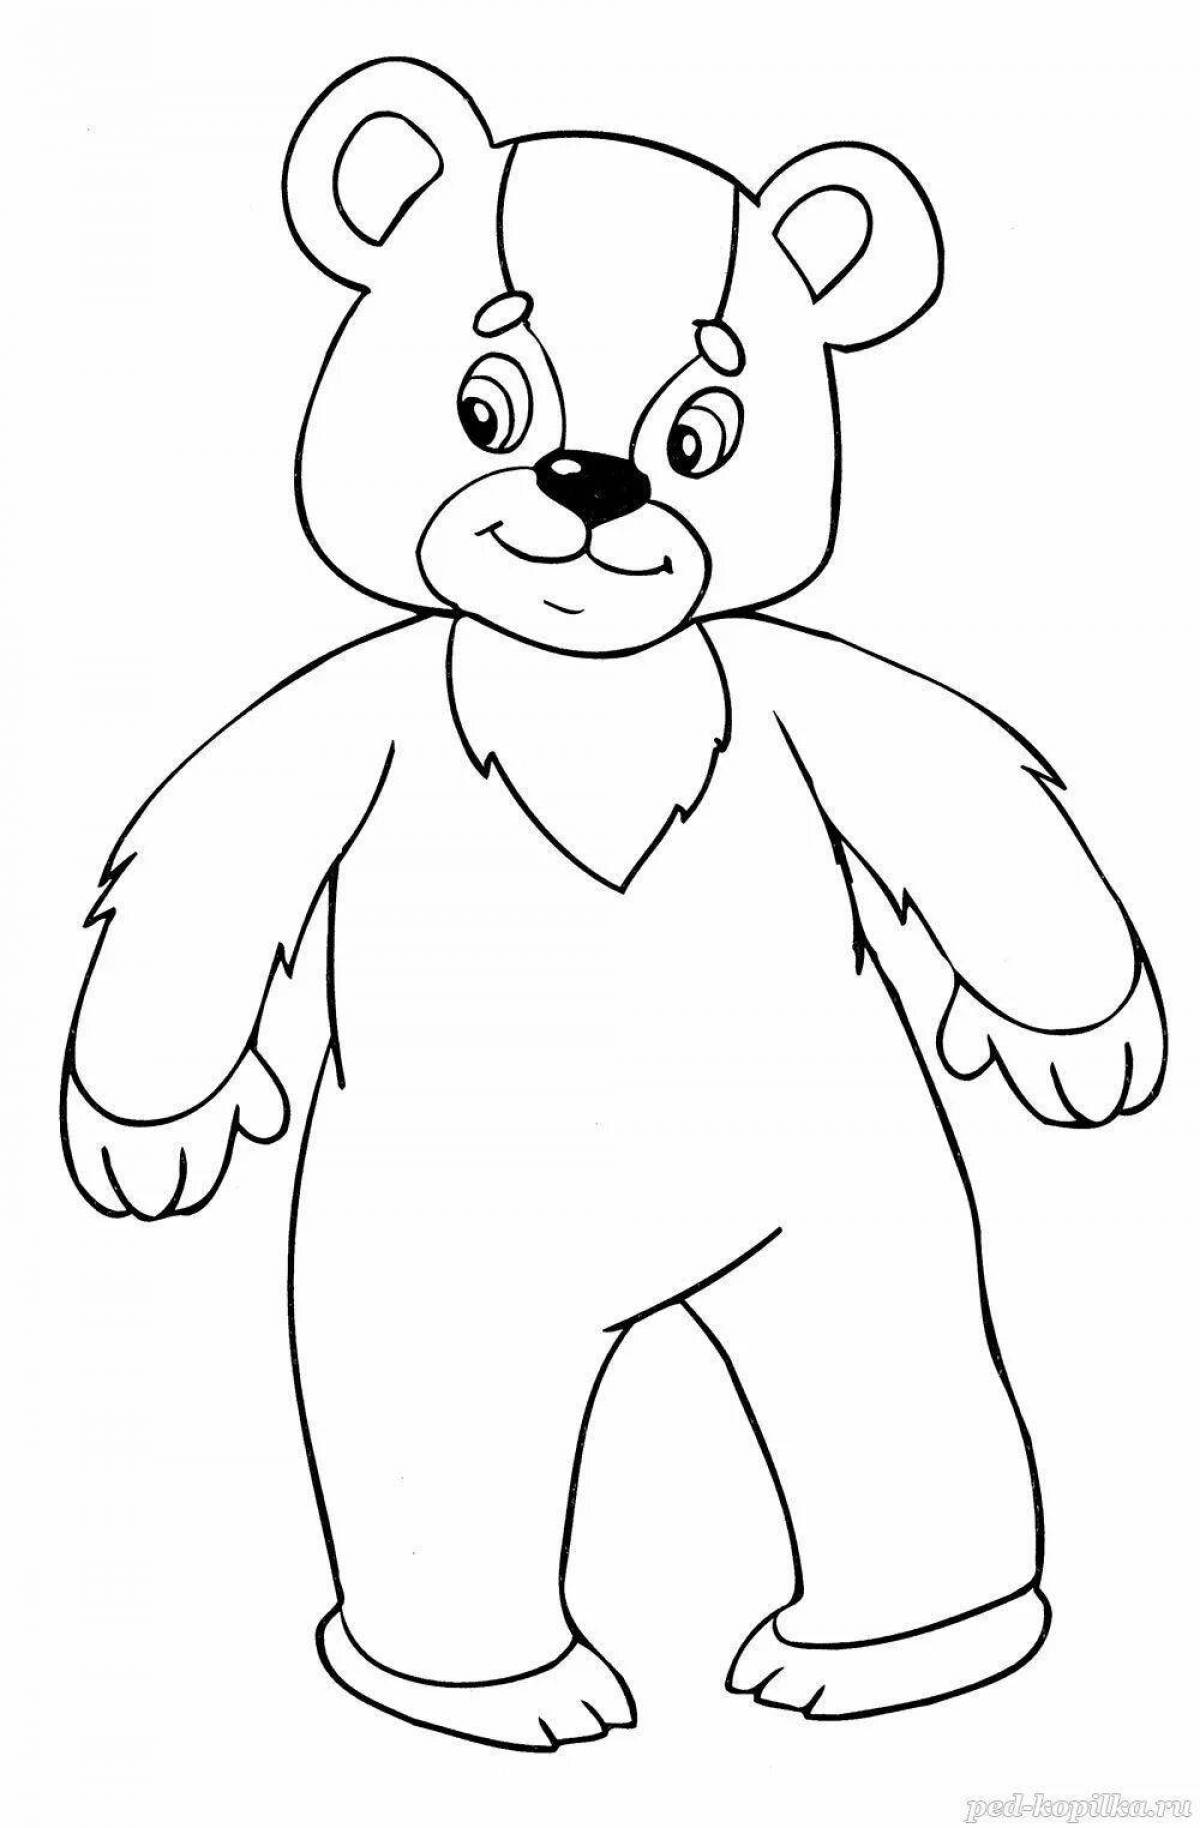 Cute teddy bear coloring book for 2-3 year olds